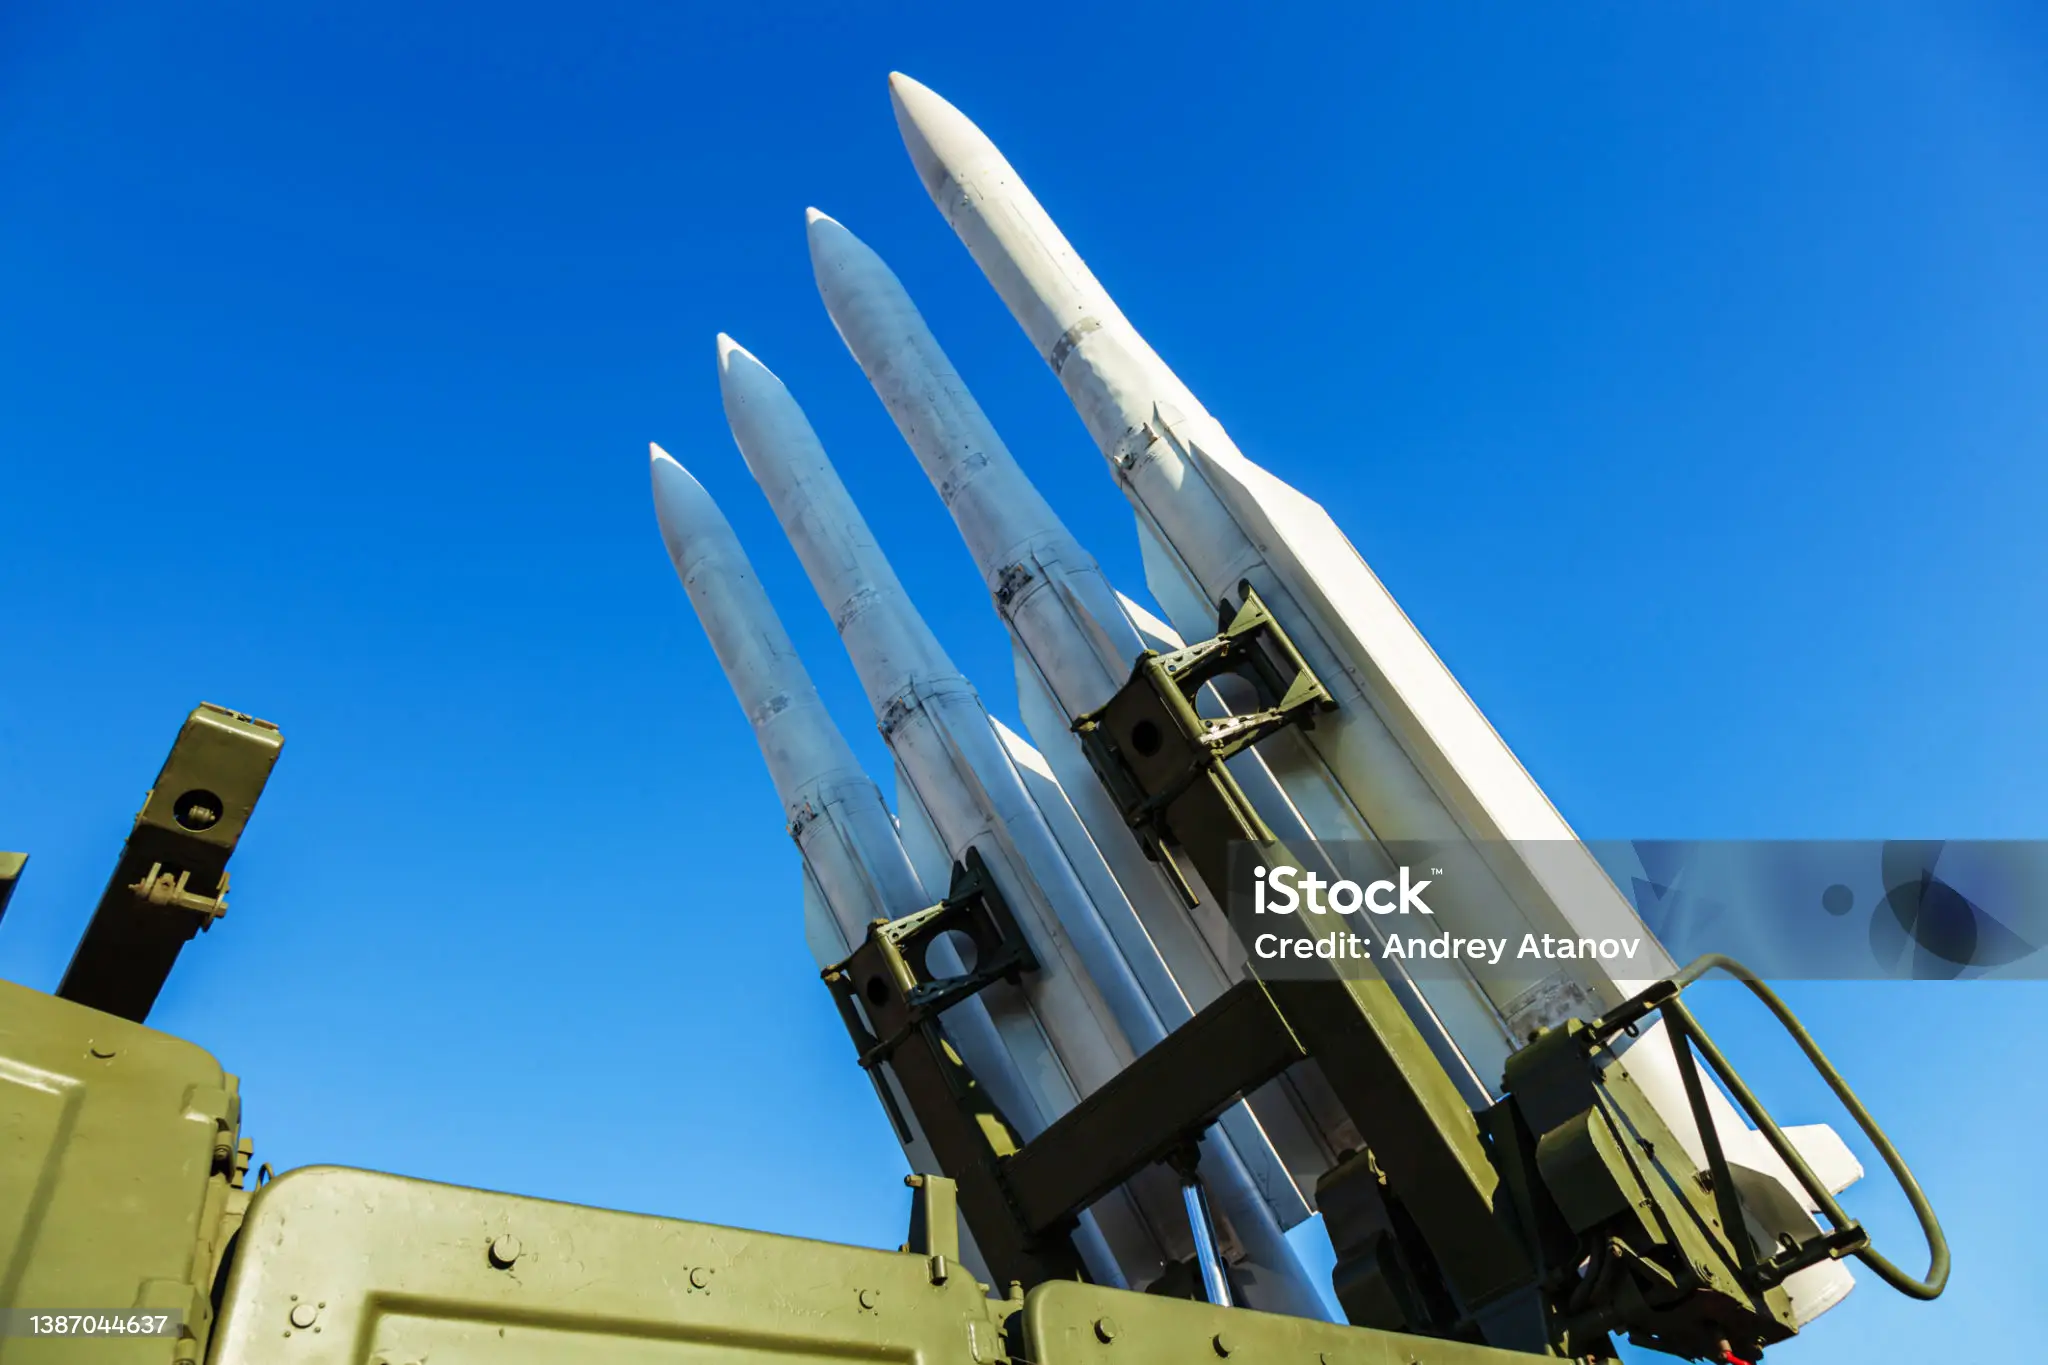 Israel’s multi-layered air defence system